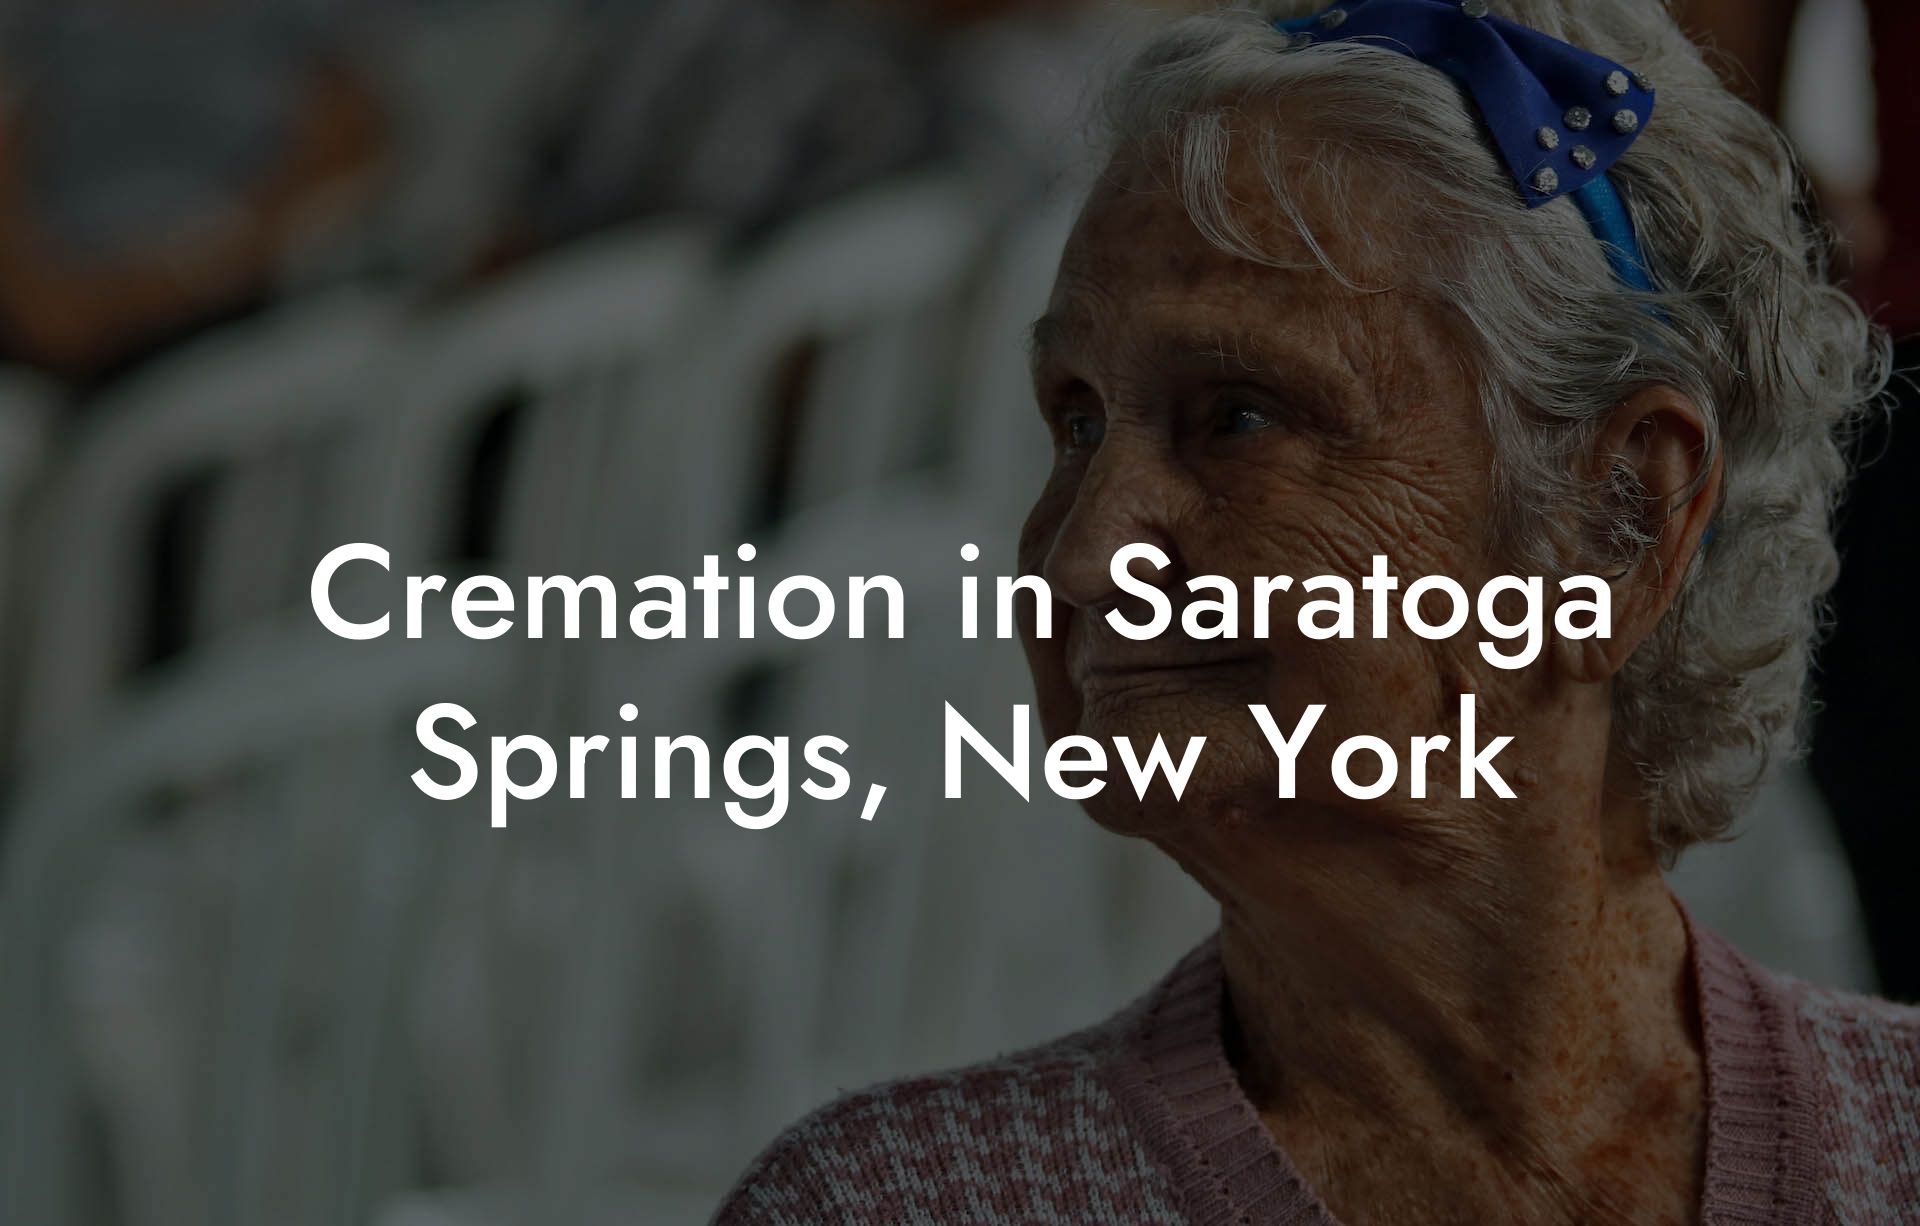 Cremation in Saratoga Springs, New York